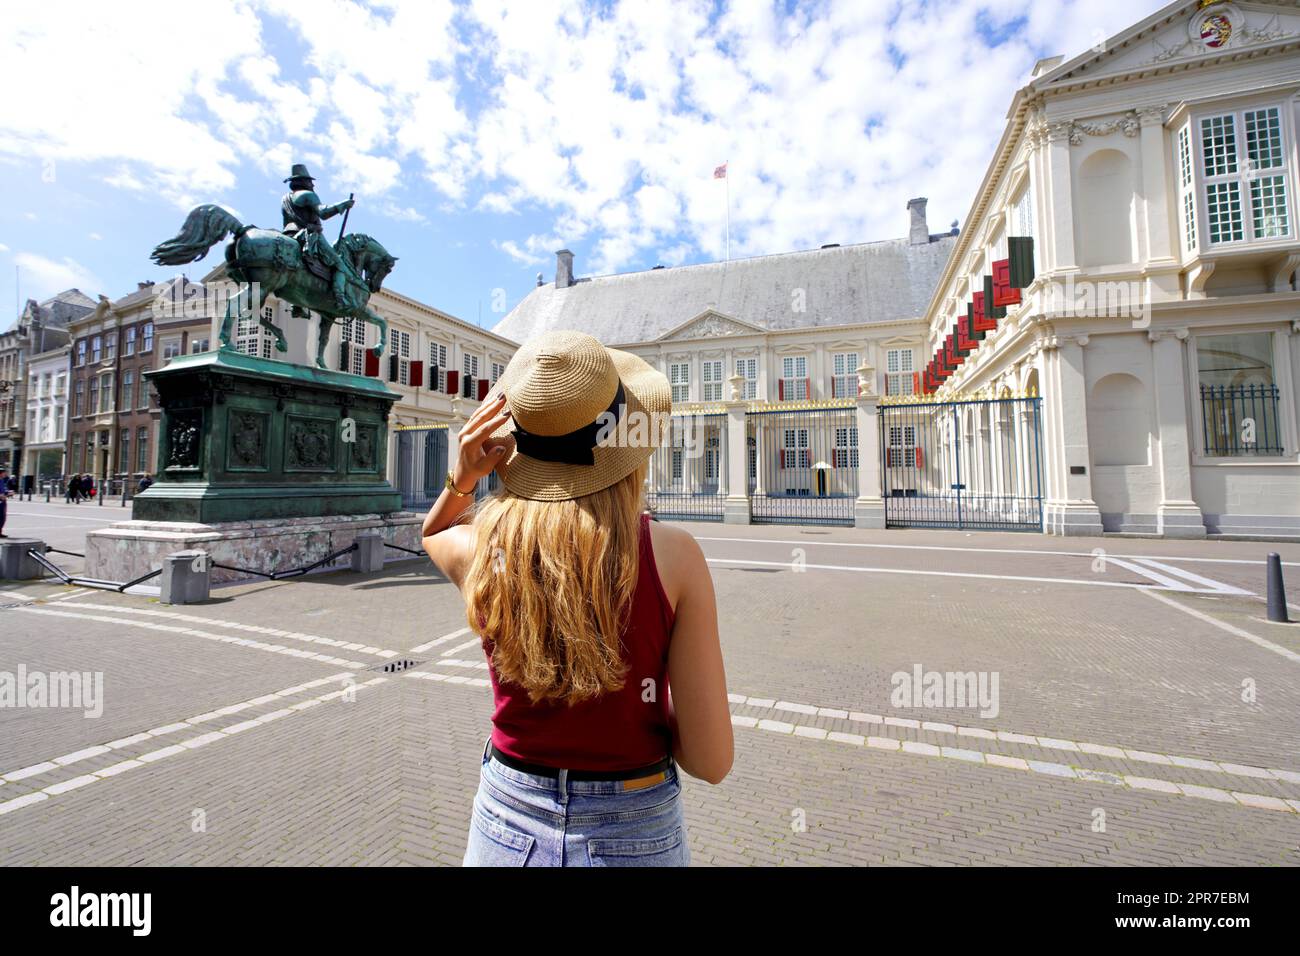 Tourism in Holland. Back view of young tourist woman visiting Noordeinde Palace in The Hague, Netherlands. Stock Photo